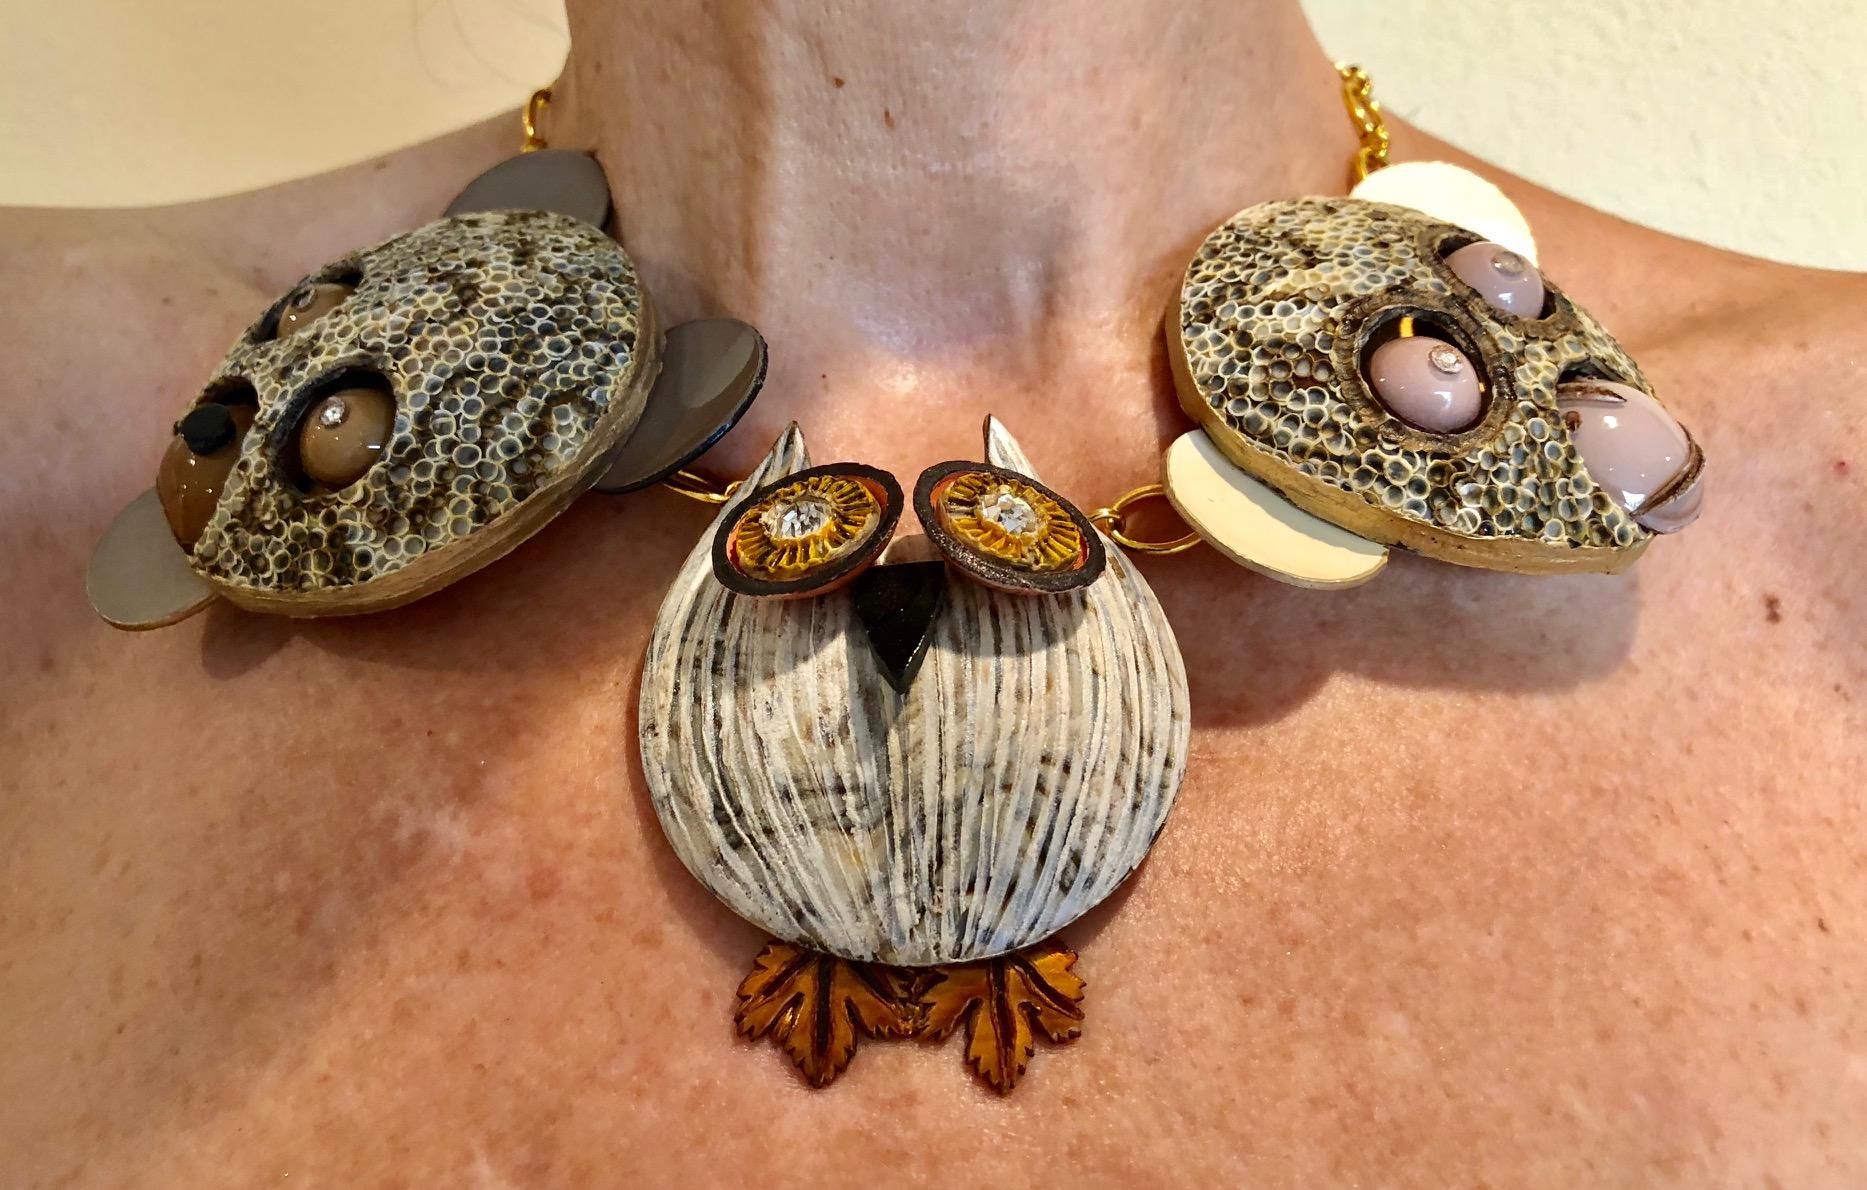 Light and easy to wear, this handmade artisanal necklace was made in Paris by Cilea.  The necklace features three large enameline (enamel and resin composite) animal figures, a bear, owl, and monkey all three with rhinestones eyes. A limited in